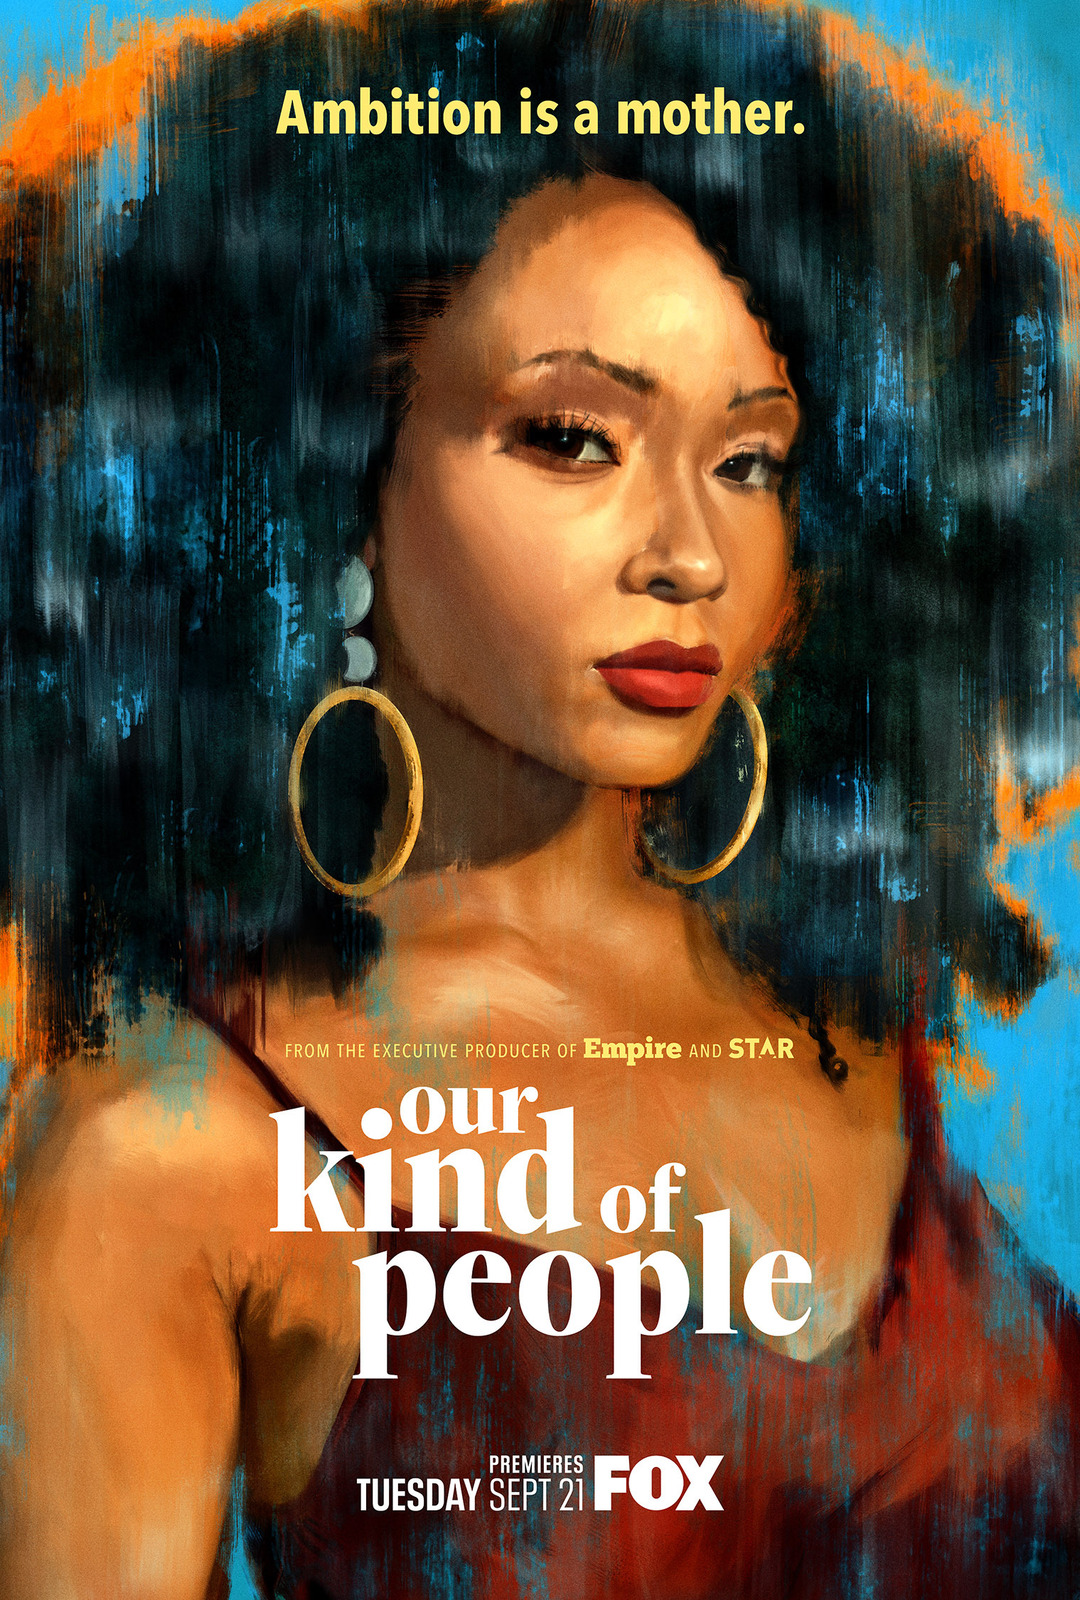 Our Kind of People Poster TV Series Art Print Size 11x17 24x36 27x40 32x48